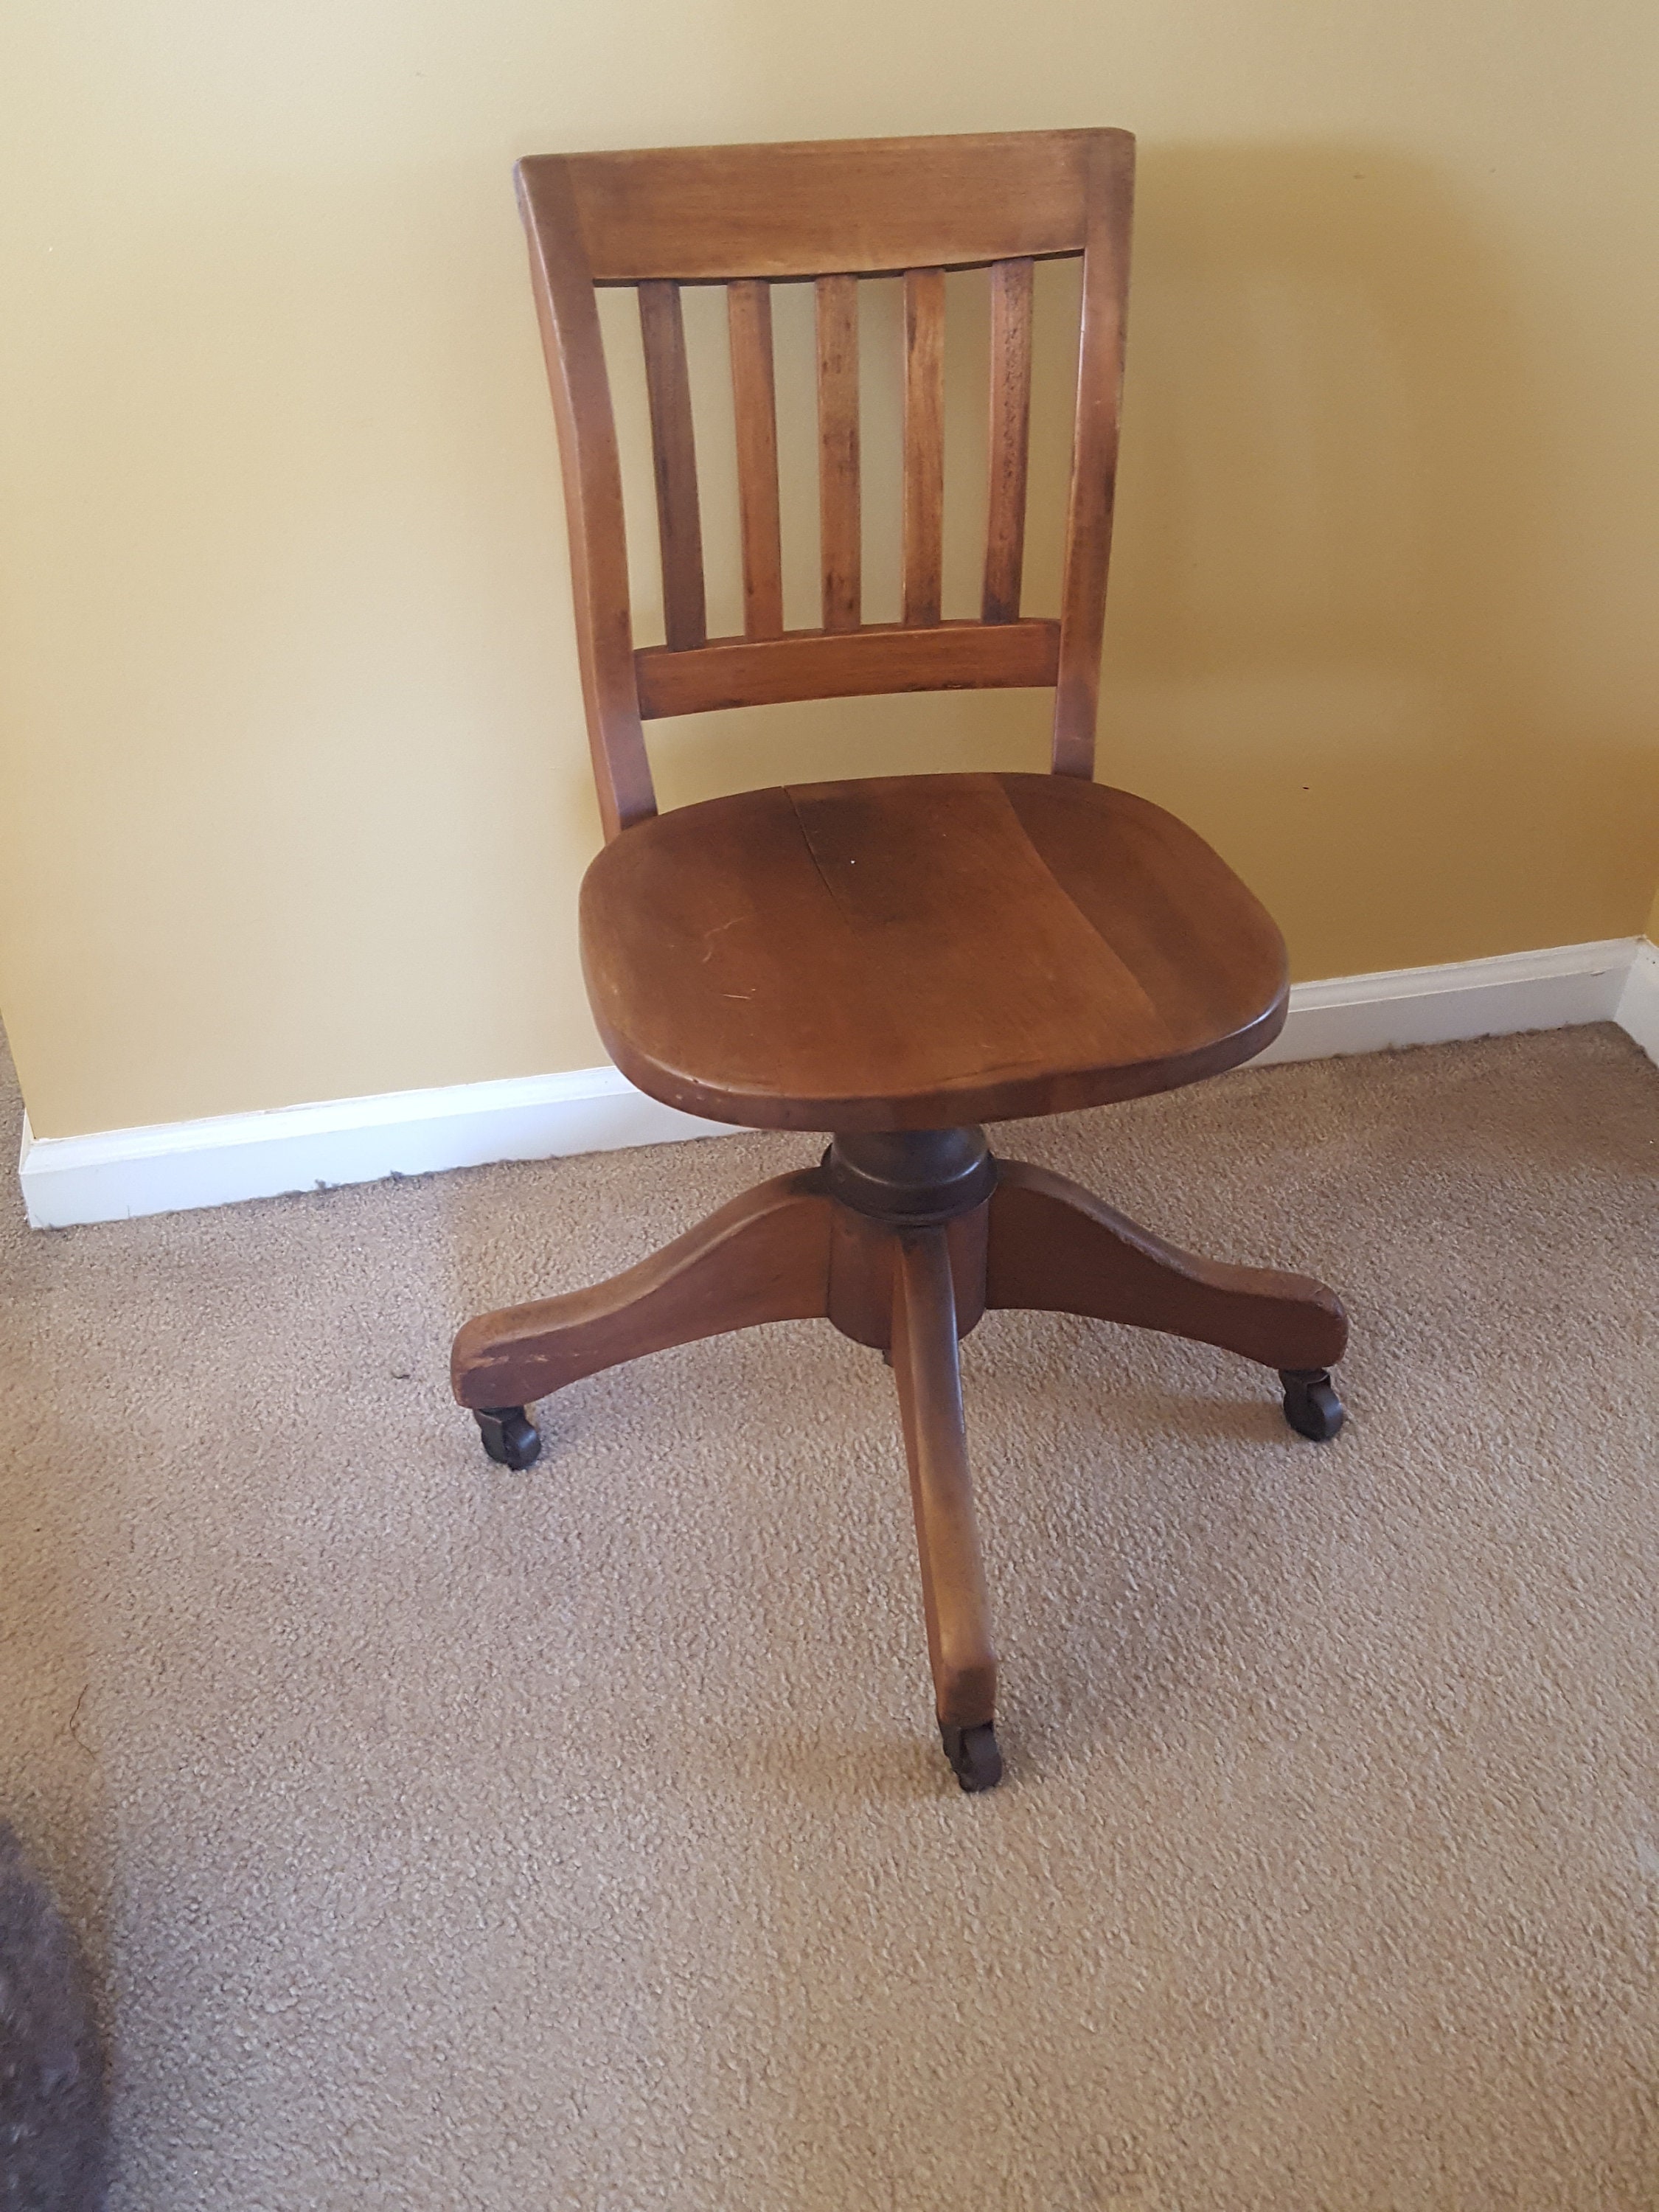 Antique Wood Desk Chair Swivel Wooden Office Chair Local Etsy